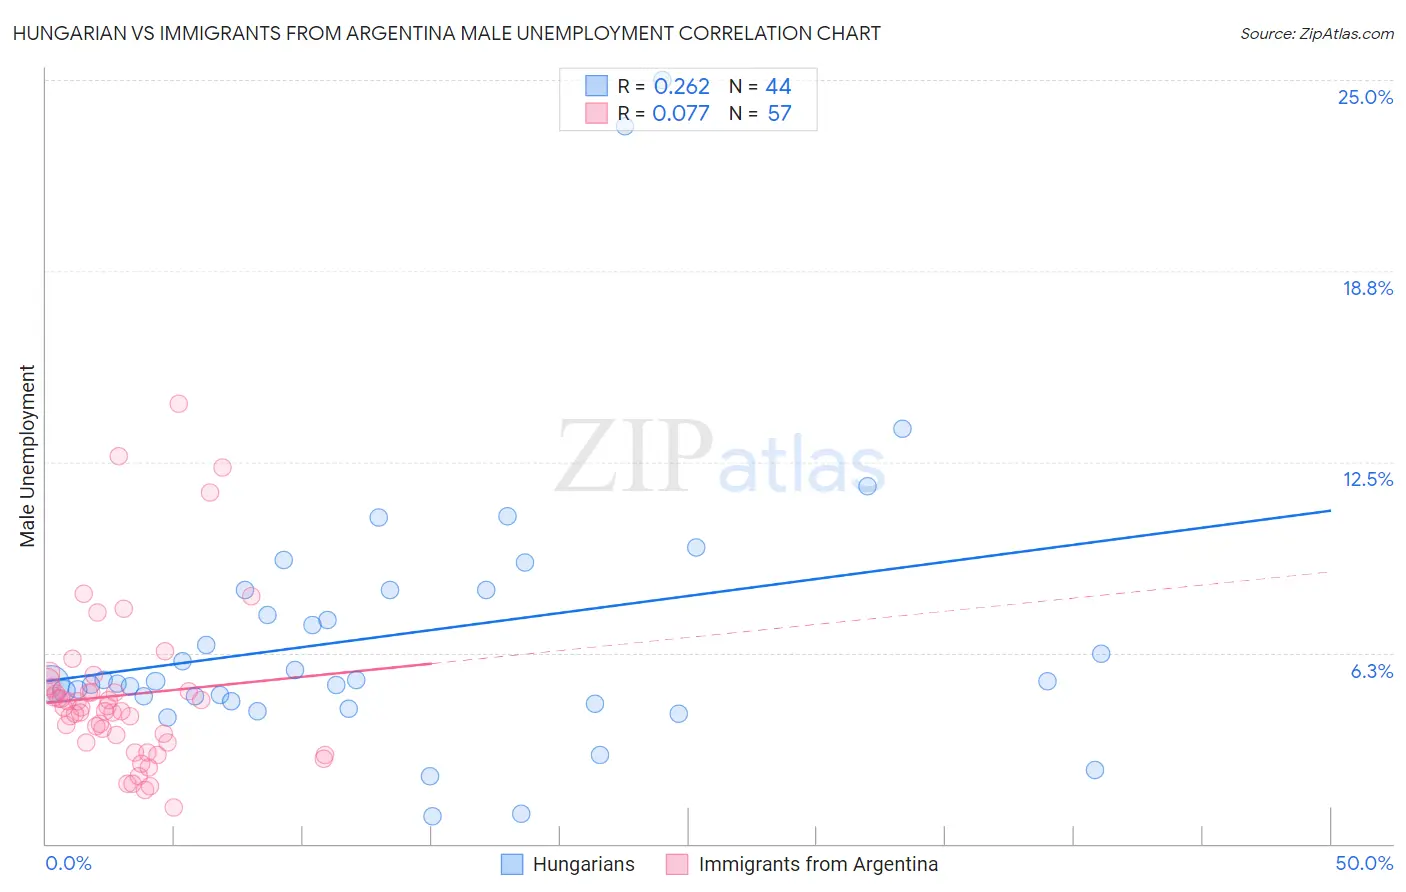 Hungarian vs Immigrants from Argentina Male Unemployment